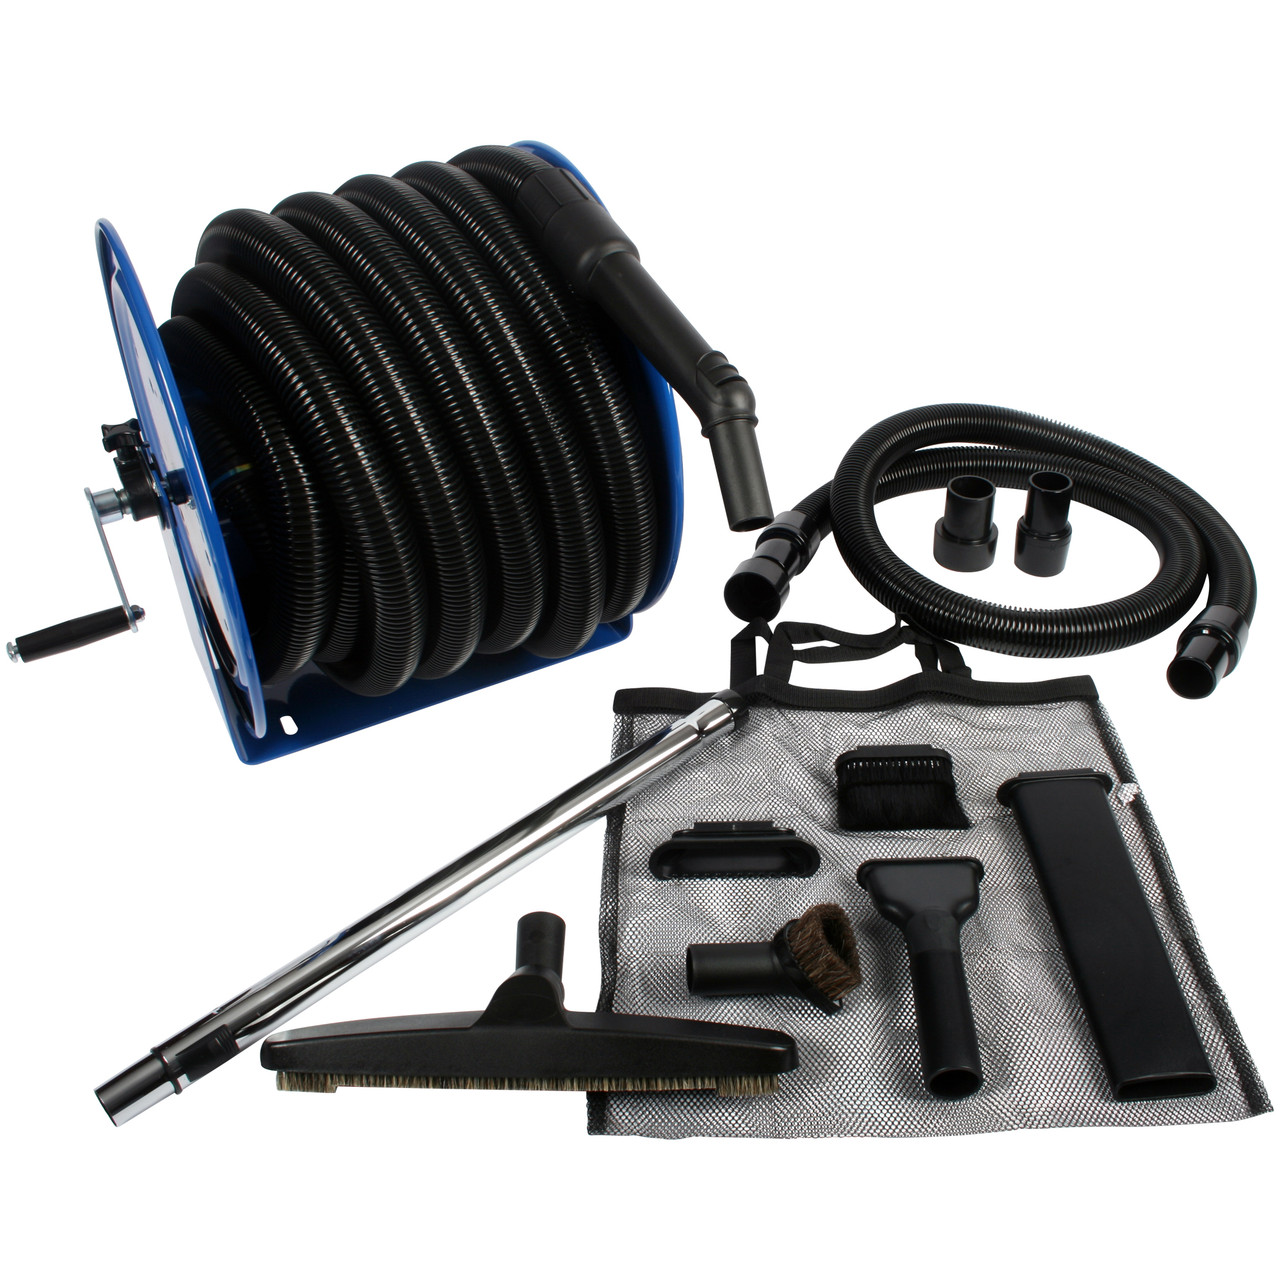 Cen-Tec Systems Industrial Grade Steel Hose Reel and Wet/Dry Vacuum Attachment Set, Gray (96997)